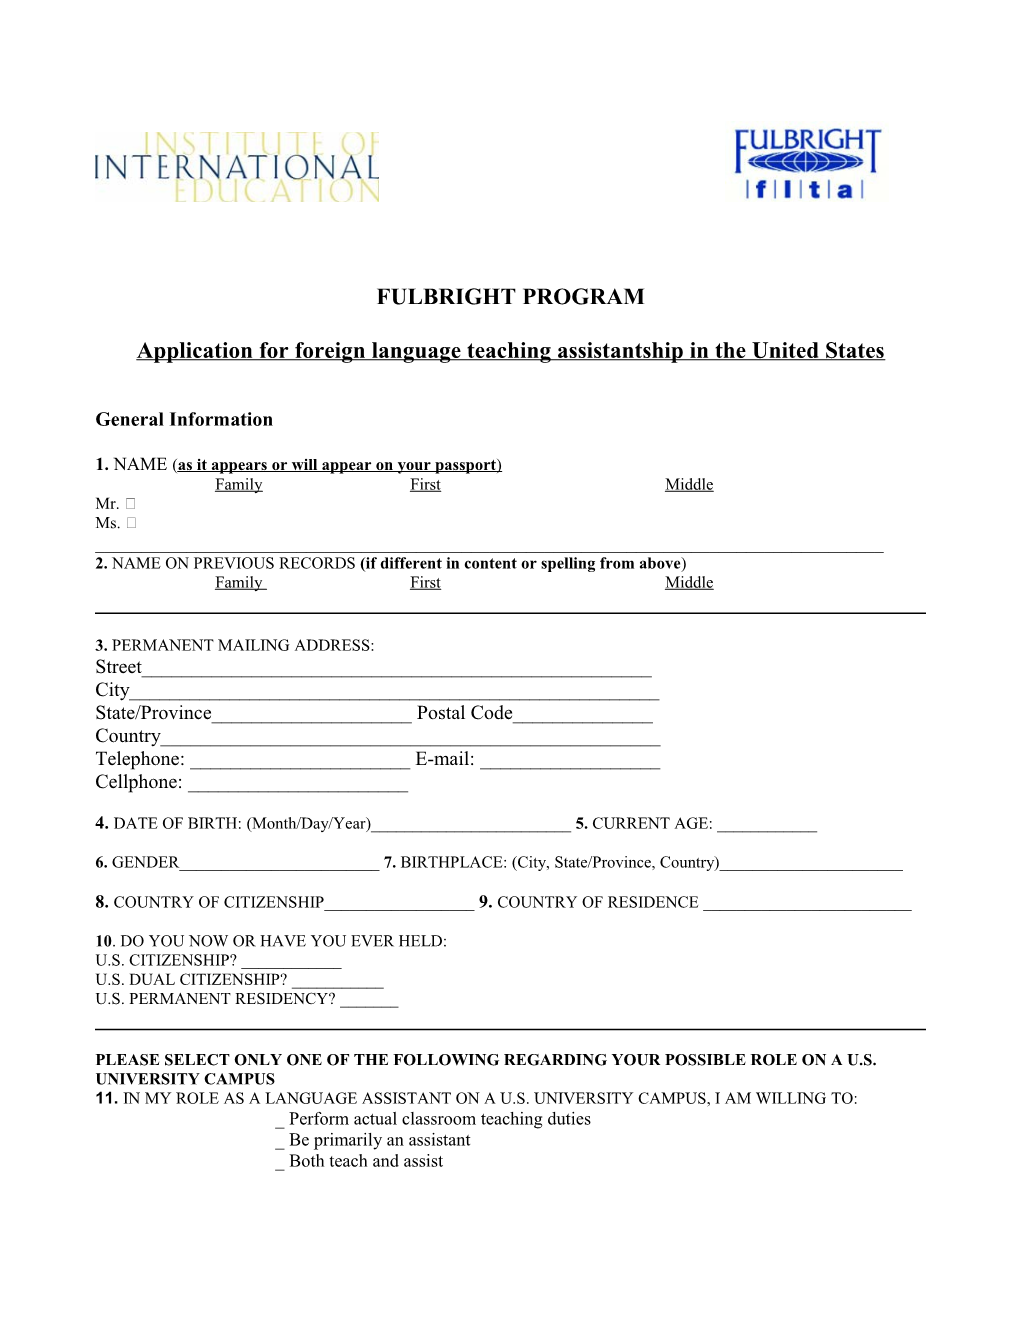 Application for Foreign Language Teaching Assistantship in the United States